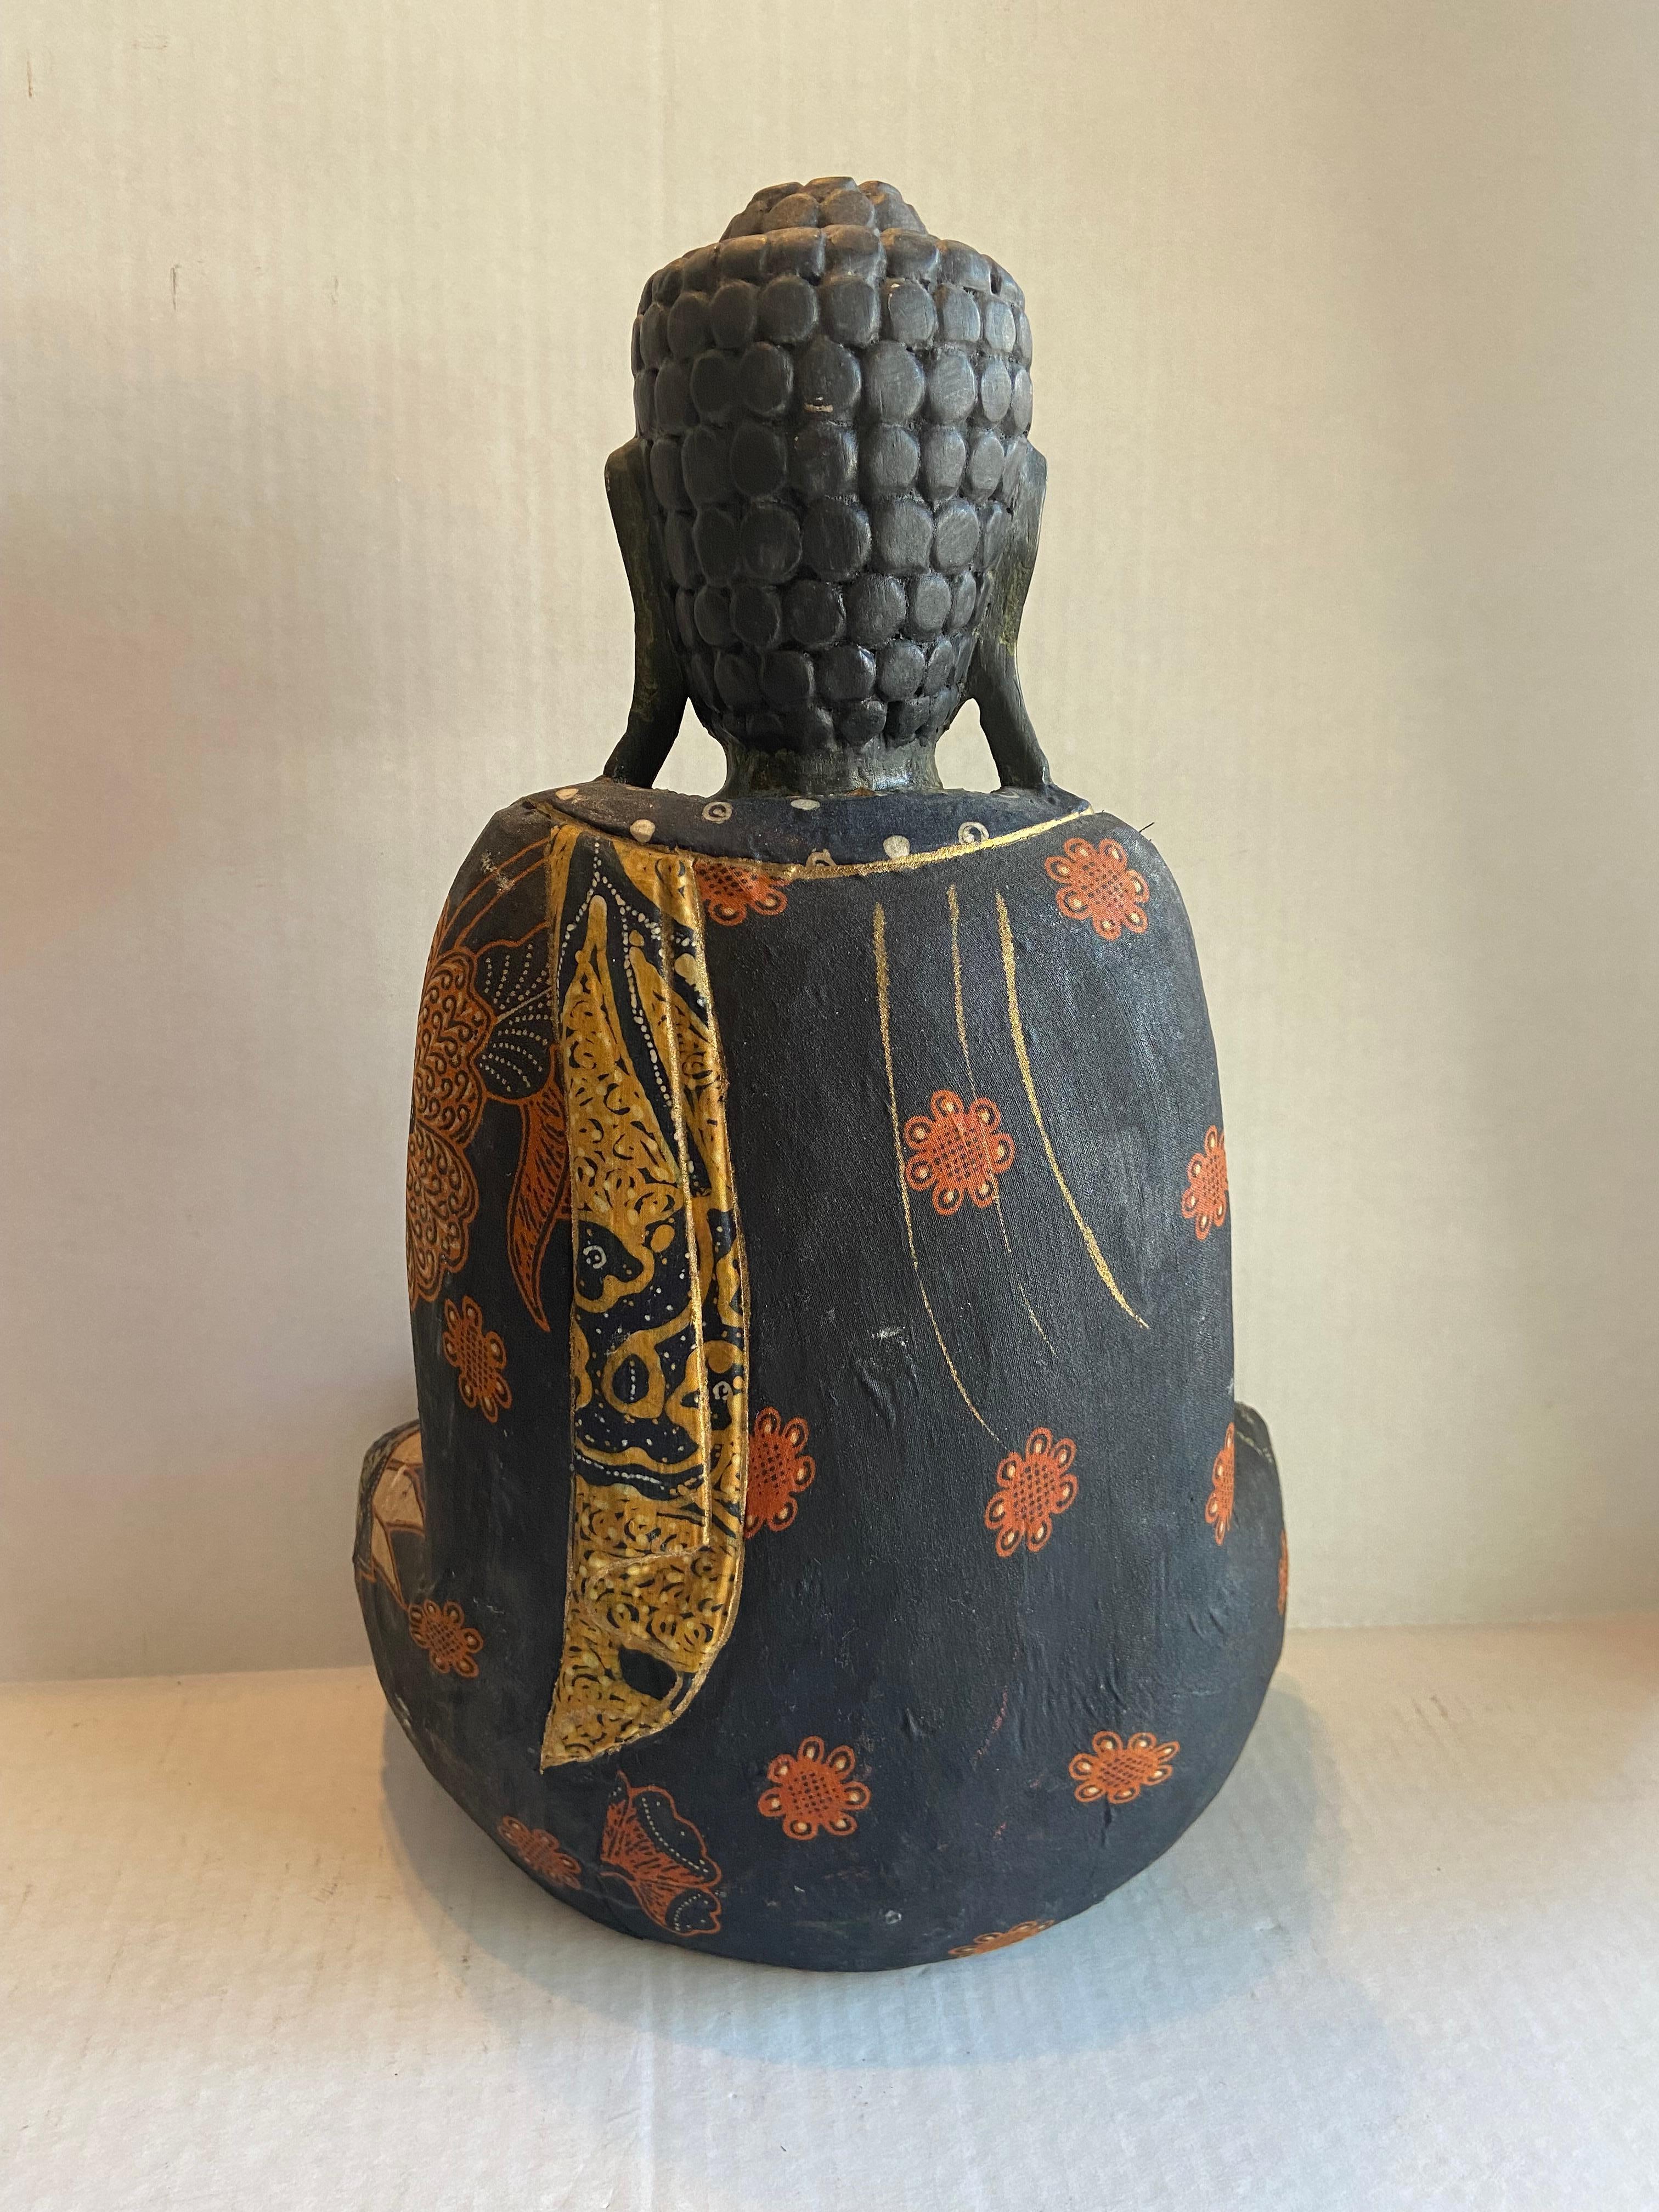 Japanese Unique antique black meditation Buddha. Decoupaged with antique Japanese textiles Depicting red Chrysanthemums (the symbol of love and deep passion) and cascading Gold Scarf down the back. Hand carved and painted gold leafed details. Snail